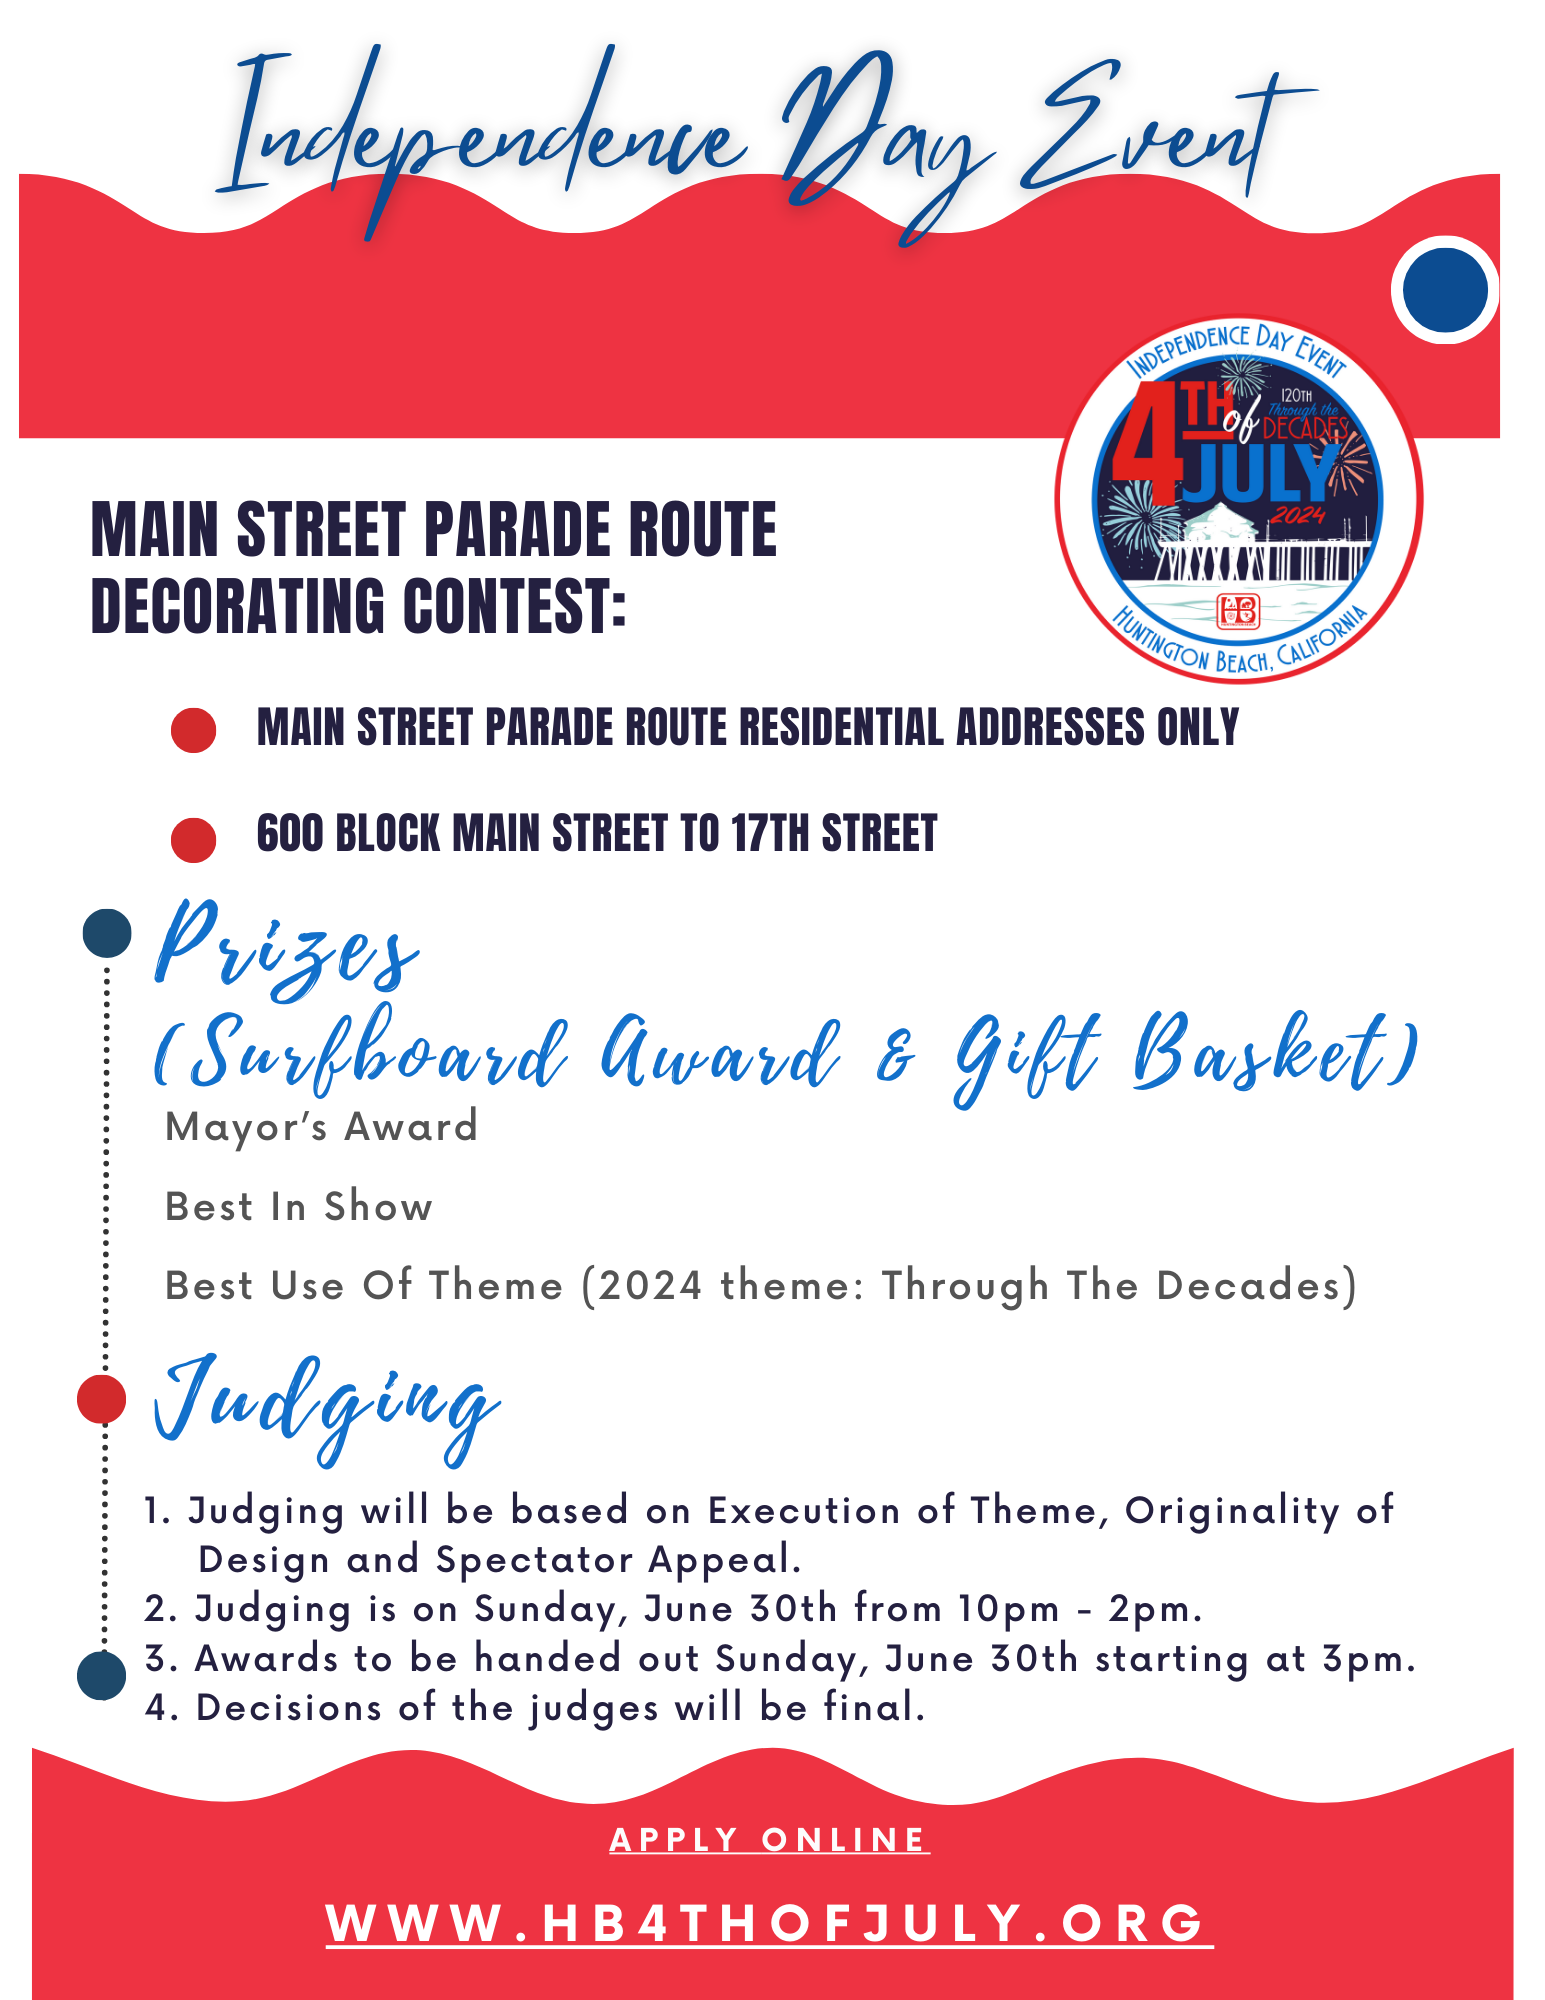 Huntington Beach Independence Day Event Main Street Route Decorating Contest